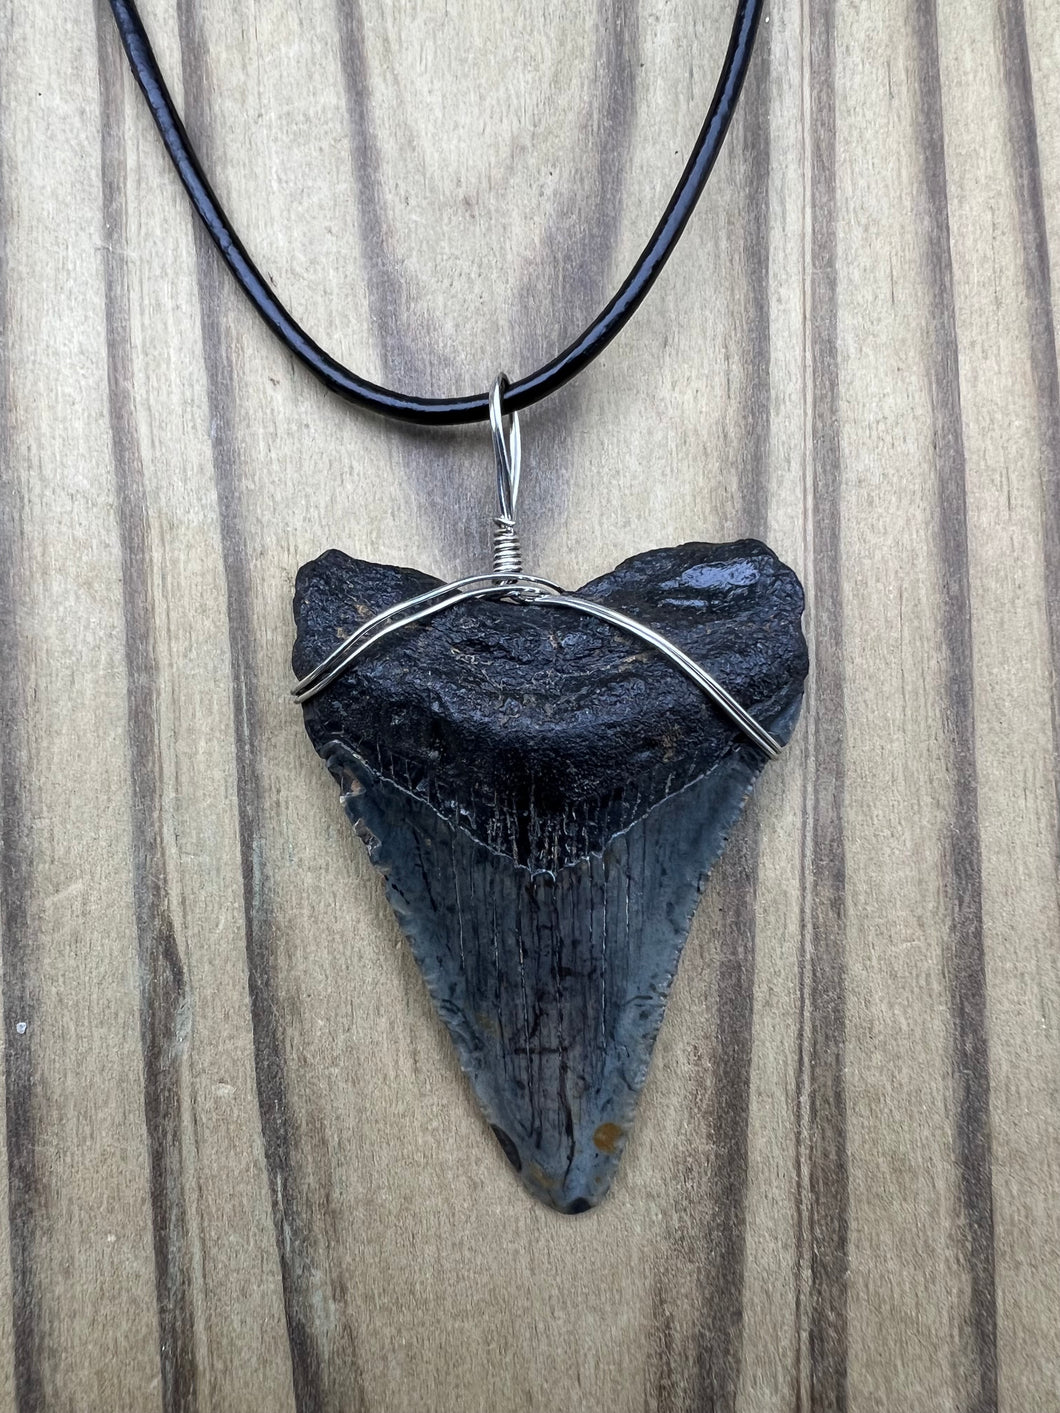 1 15/16 inch Fossilized Megalodon Shark Tooth Necklace Plain Cord